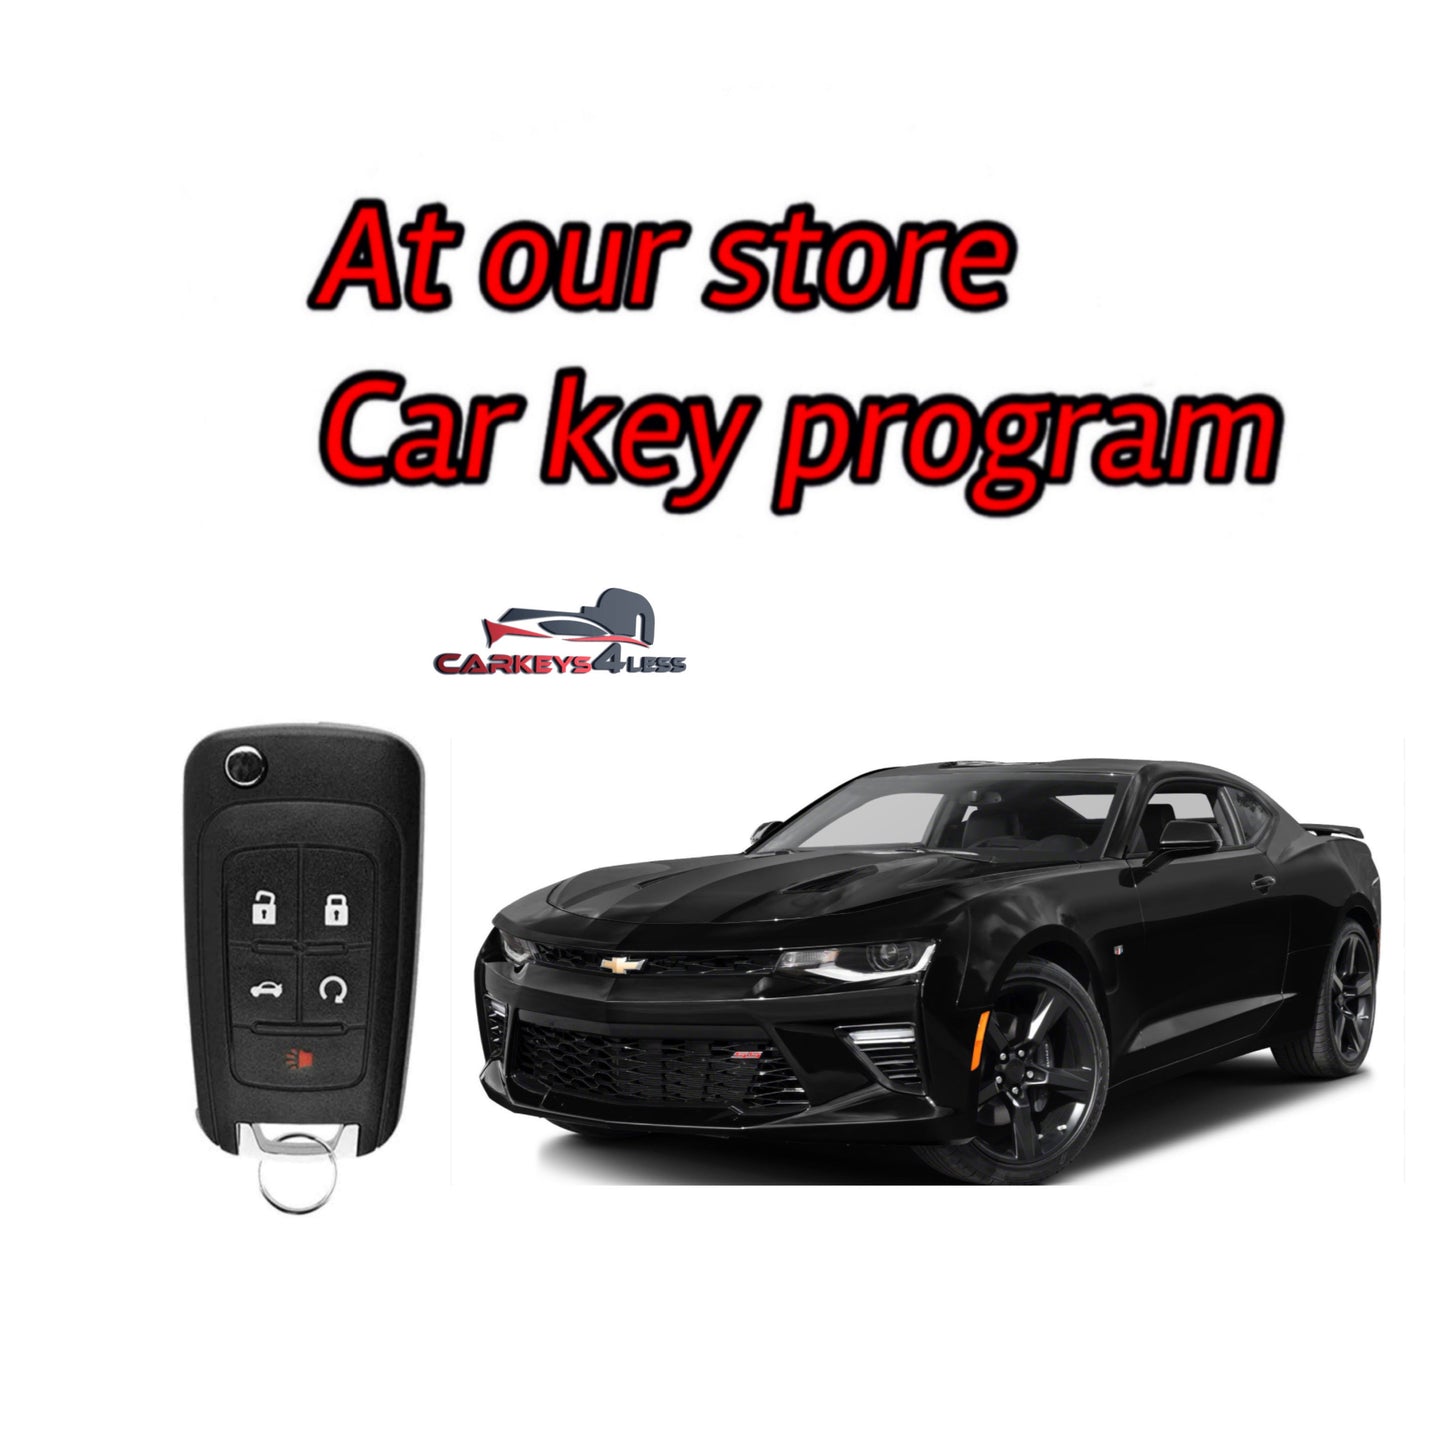 At our store car key replacement for Chevrolet